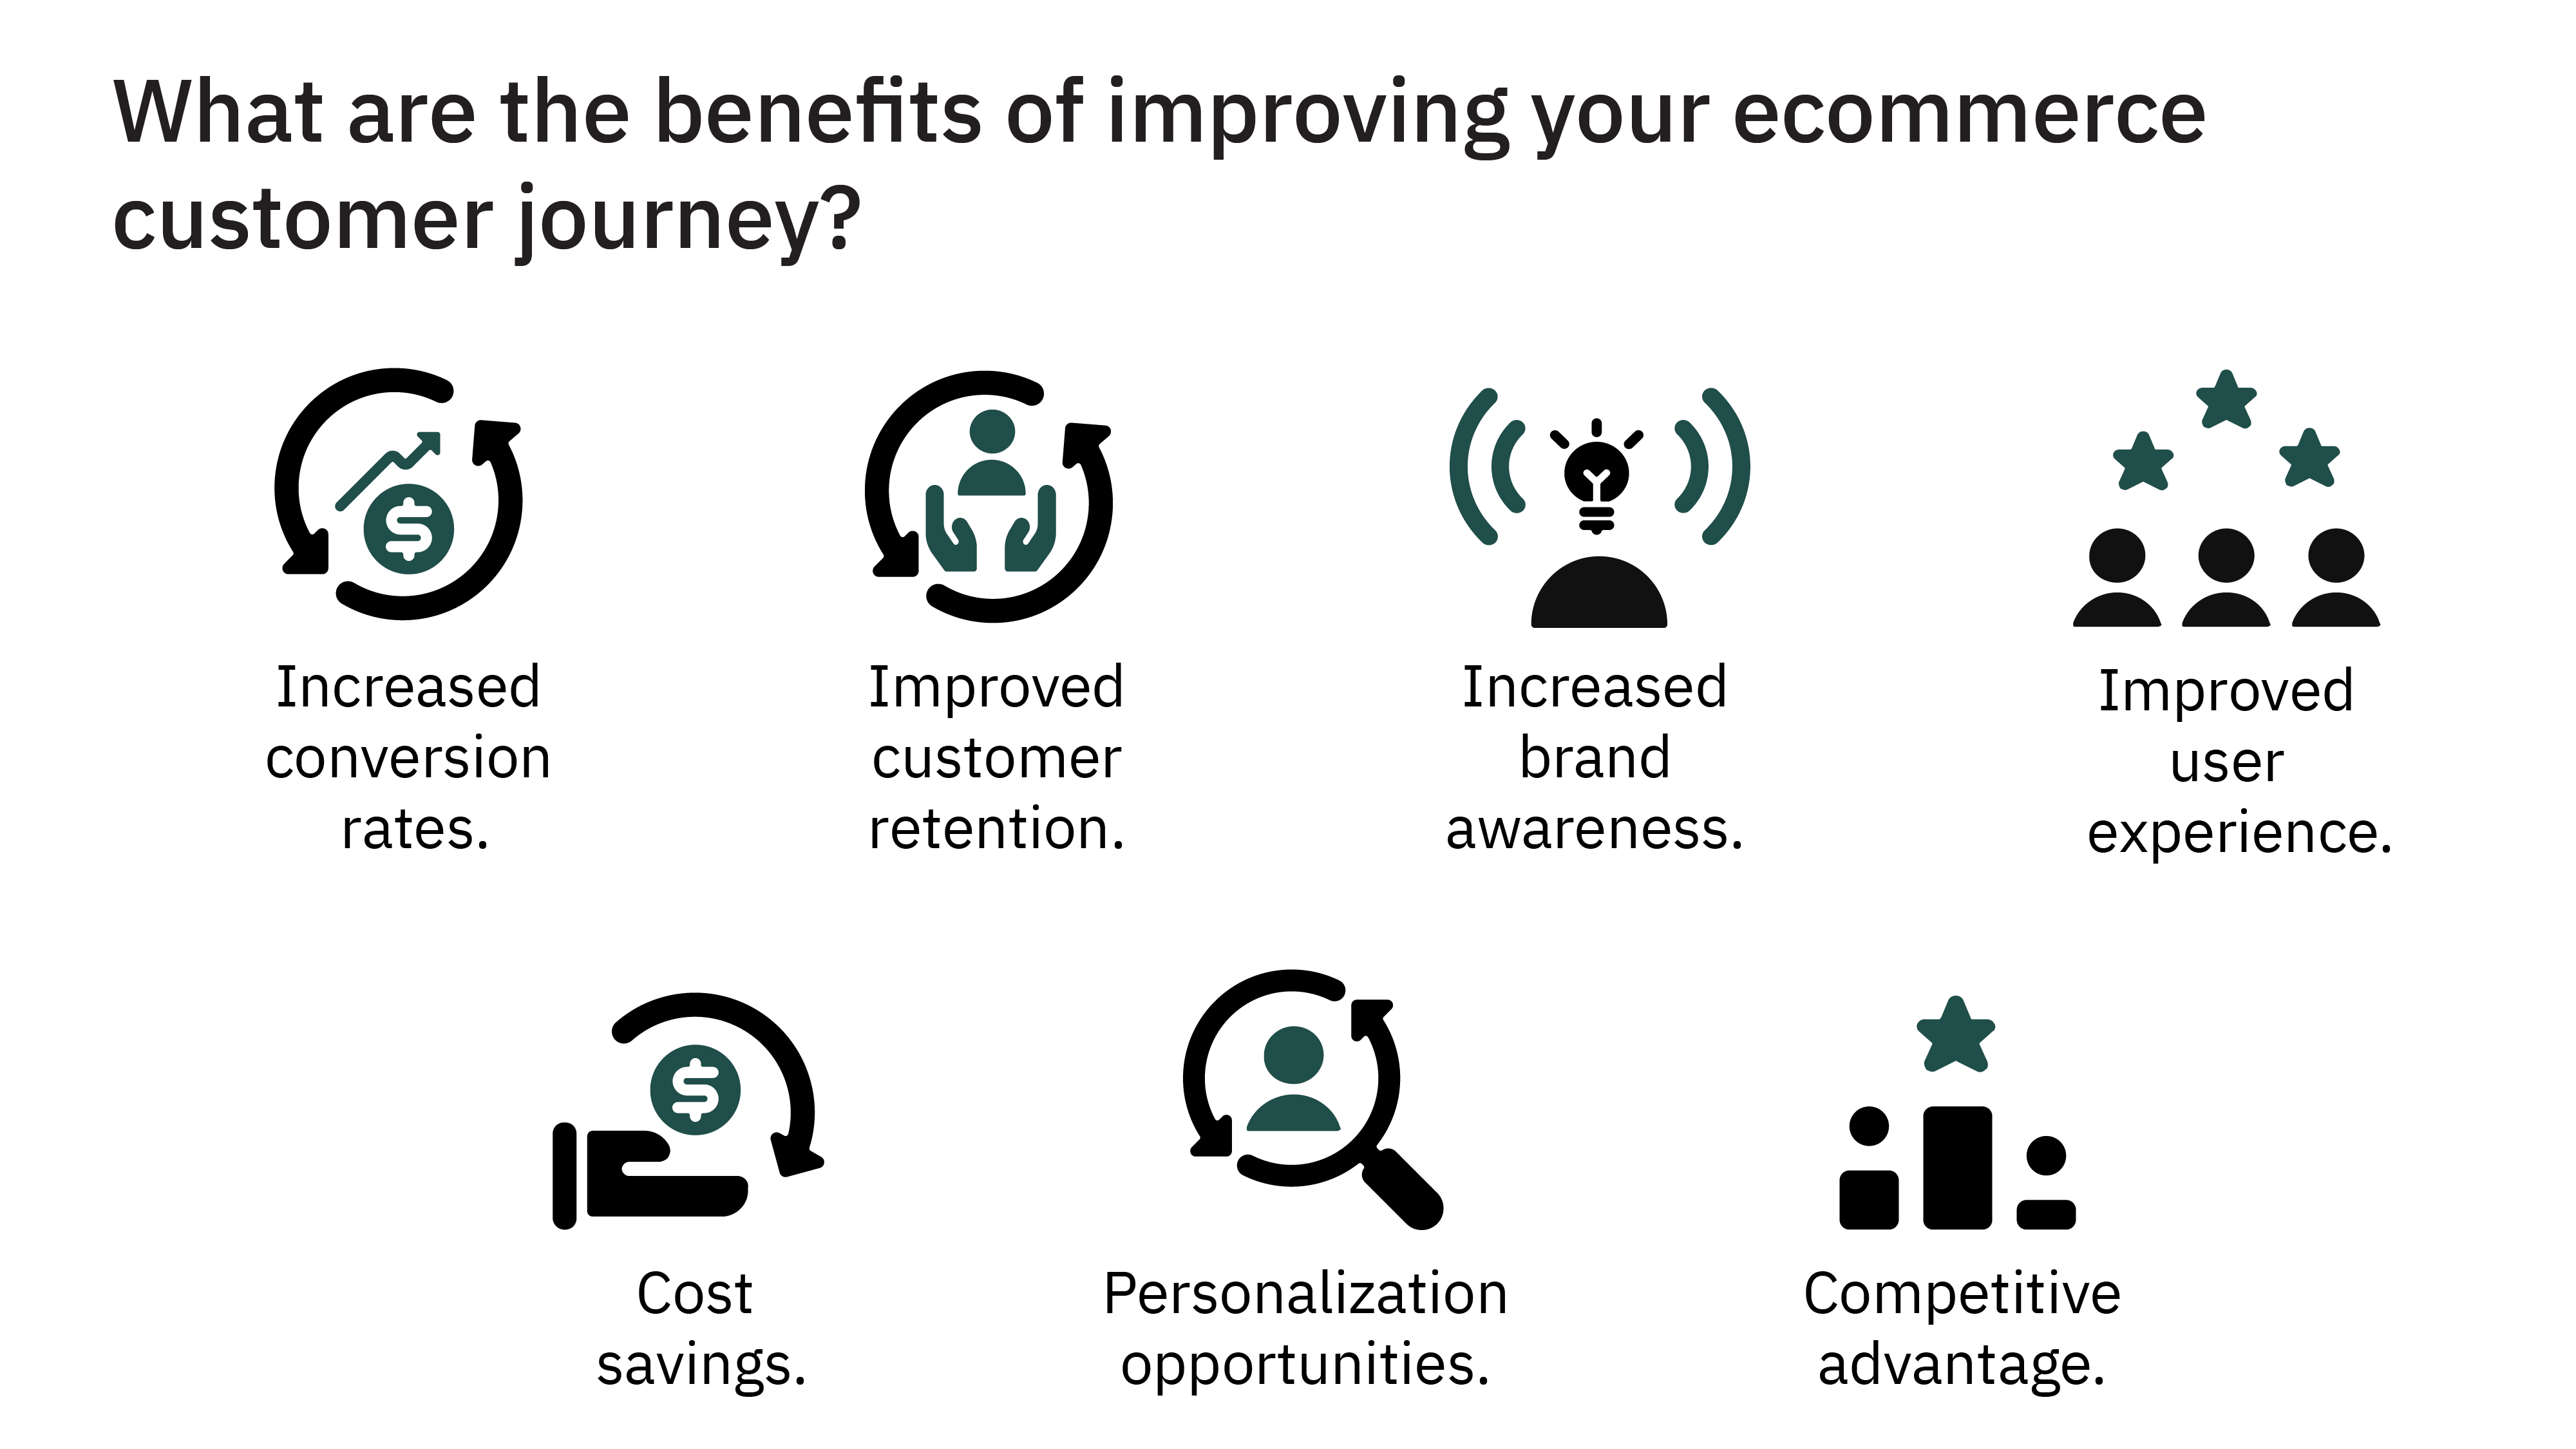 The benefits of improving your ecommerce customer journey.